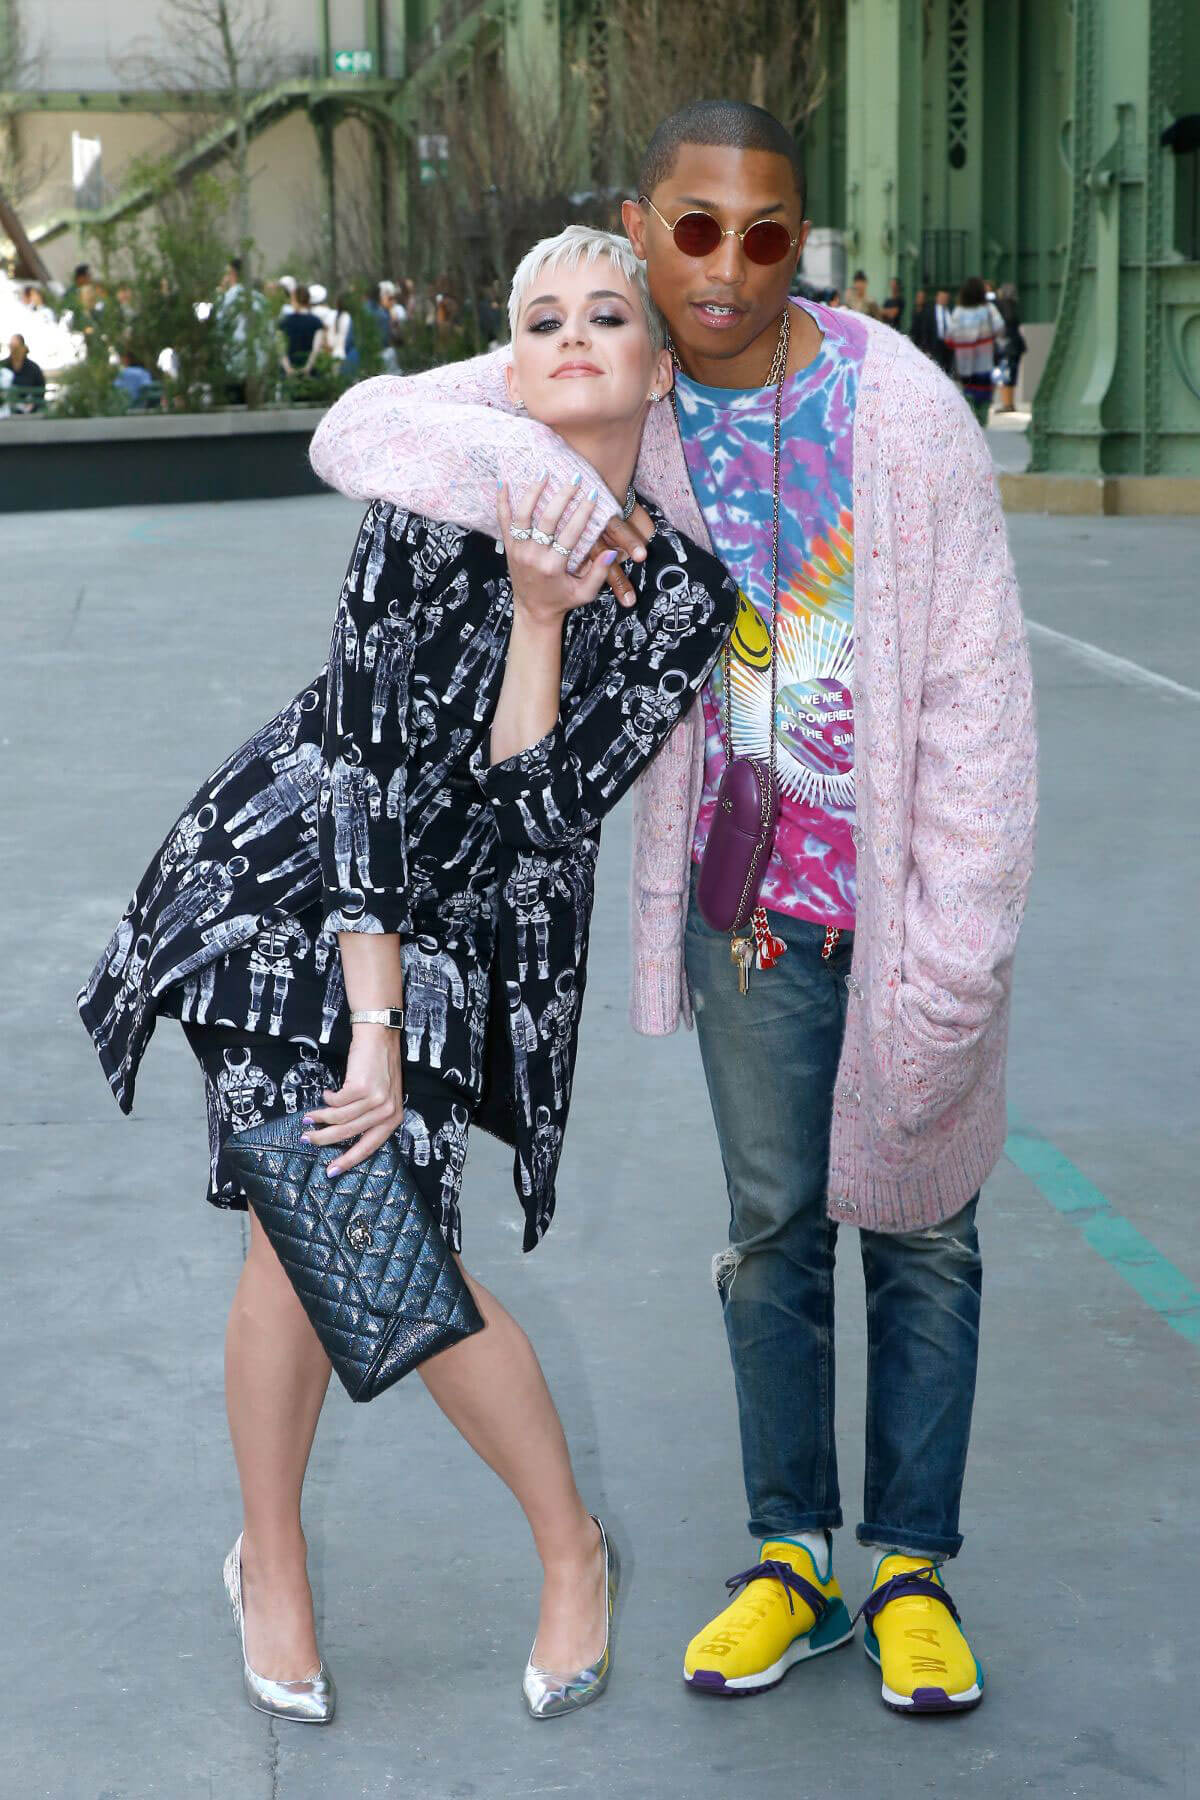 Katy Perry and Pharrell Williams Stills at Chanel Fashion Show in Paris